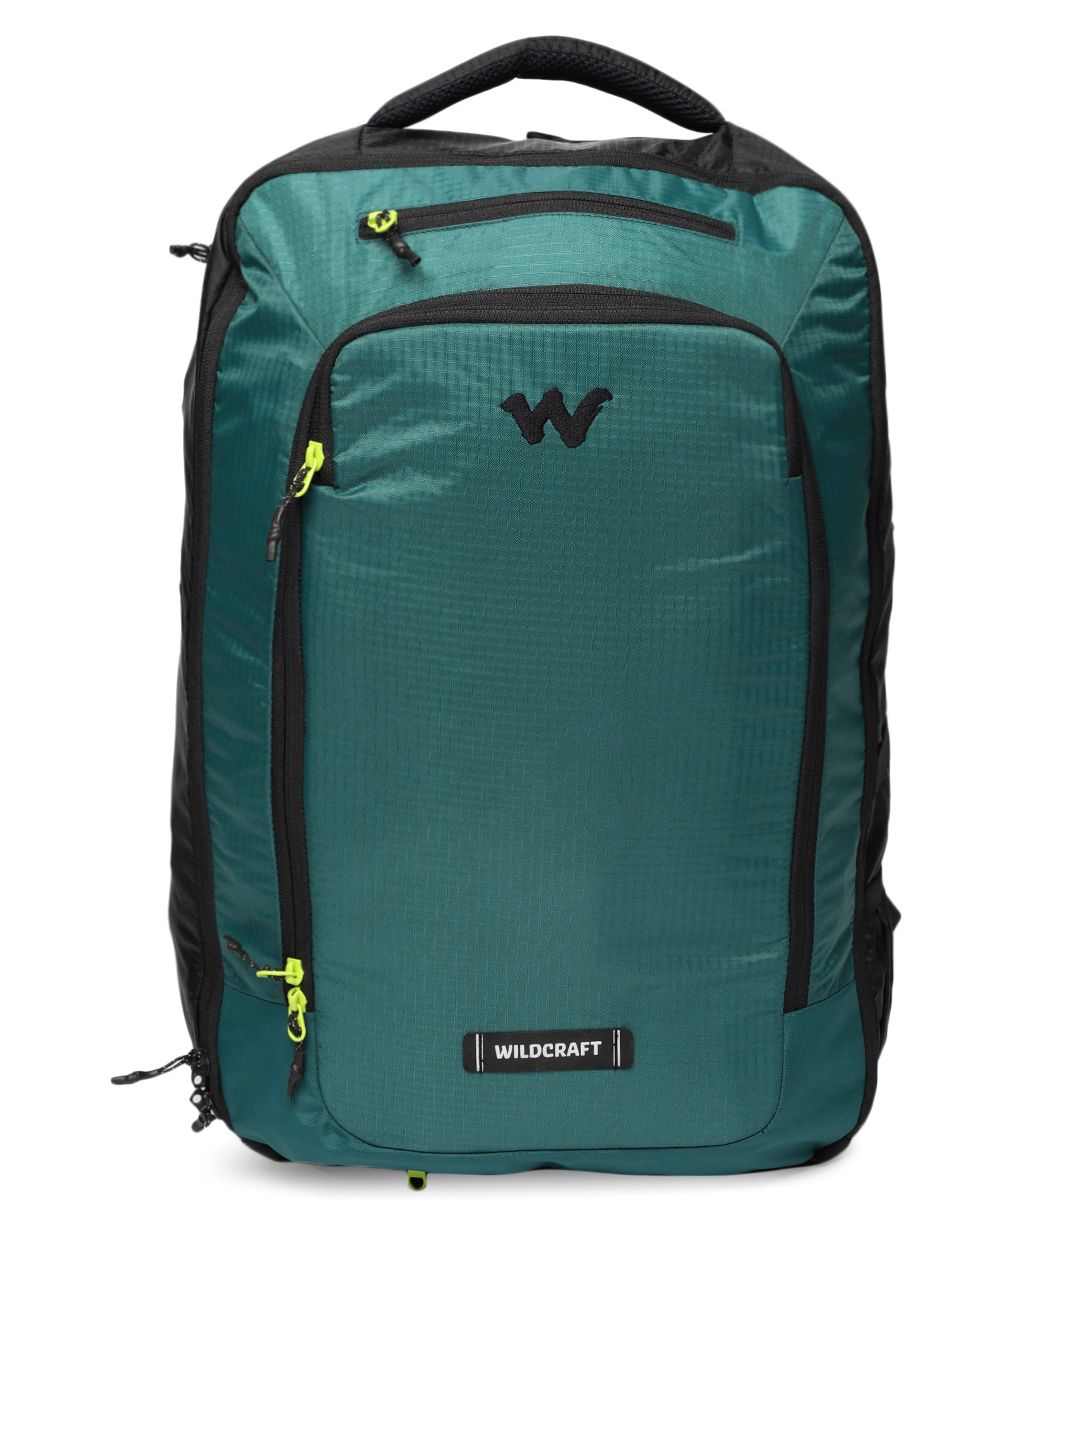 Wildcraft Unisex Teal Solid Backpack Price in India